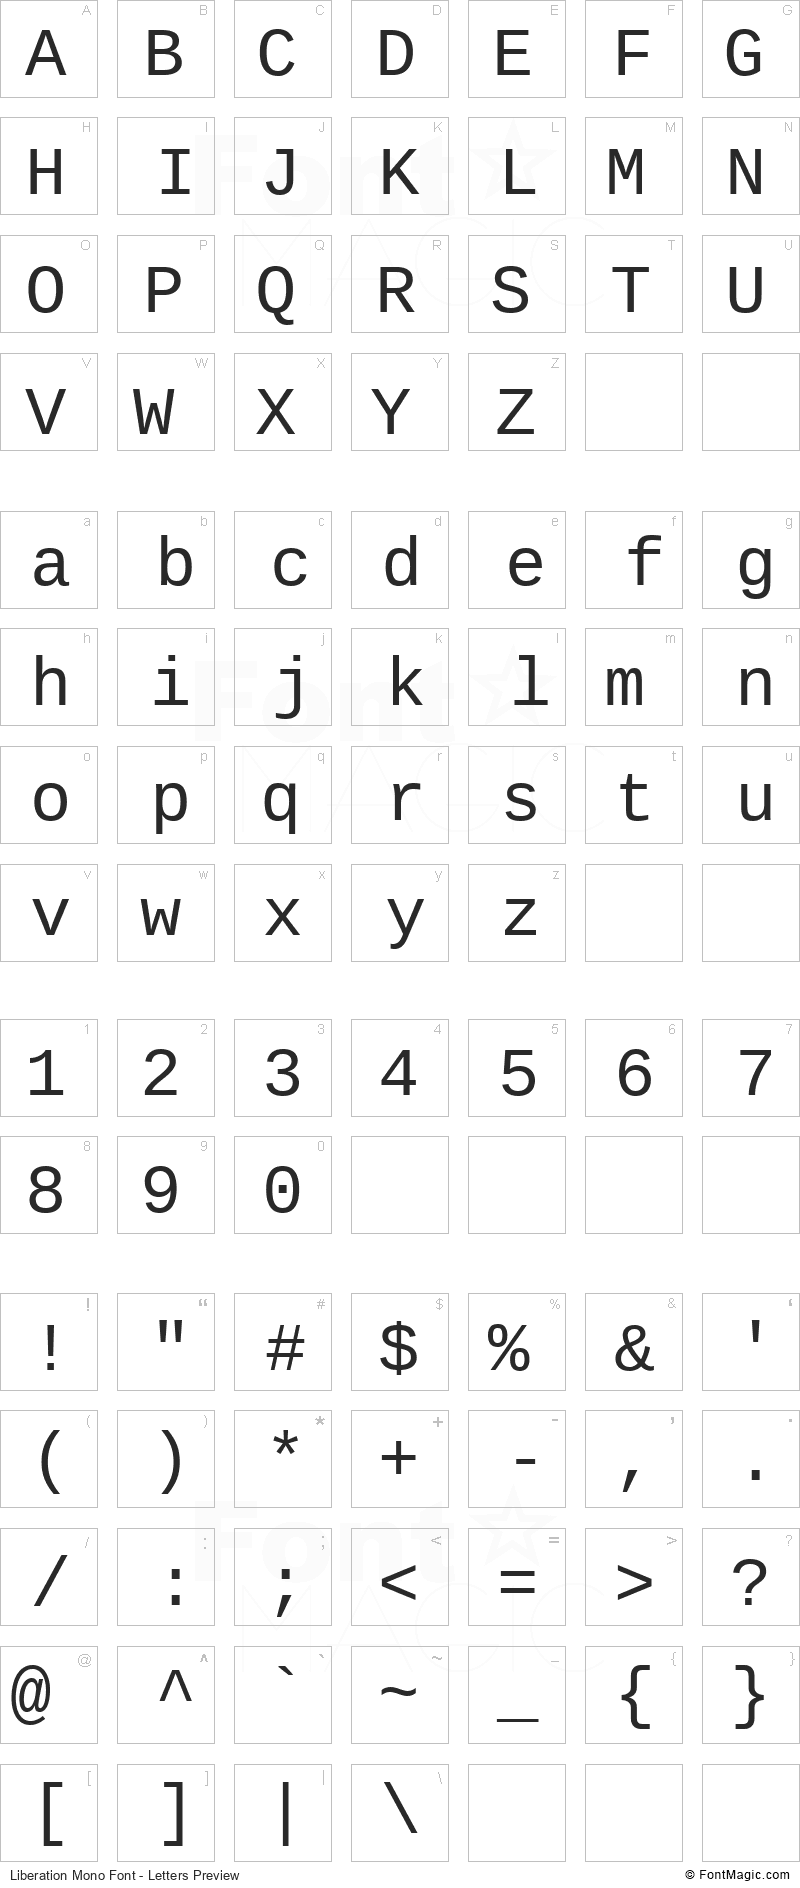 Liberation Mono Font - All Latters Preview Chart